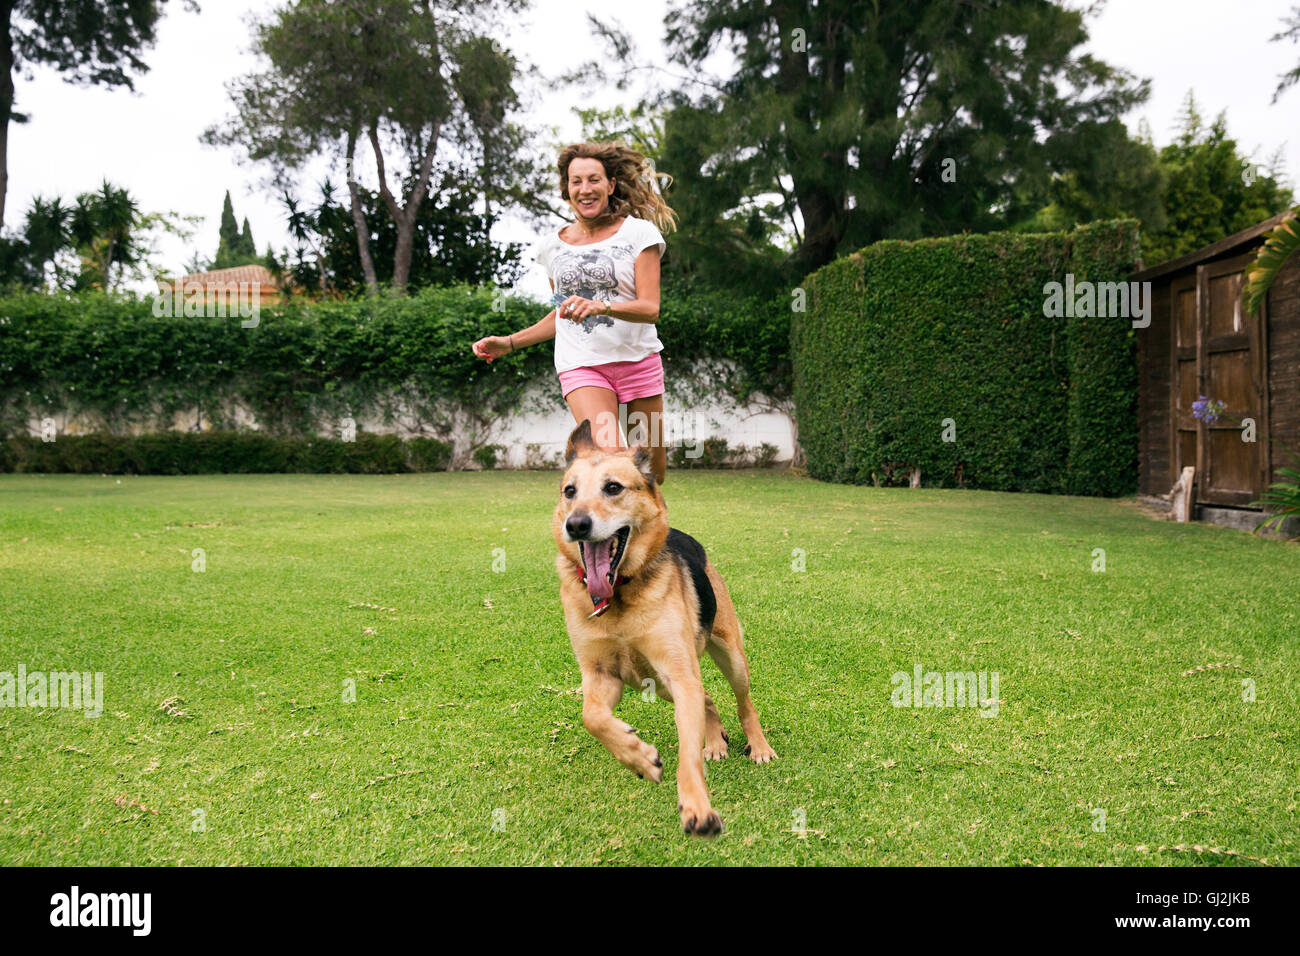 Mature woman running in park with dog Stock Photo